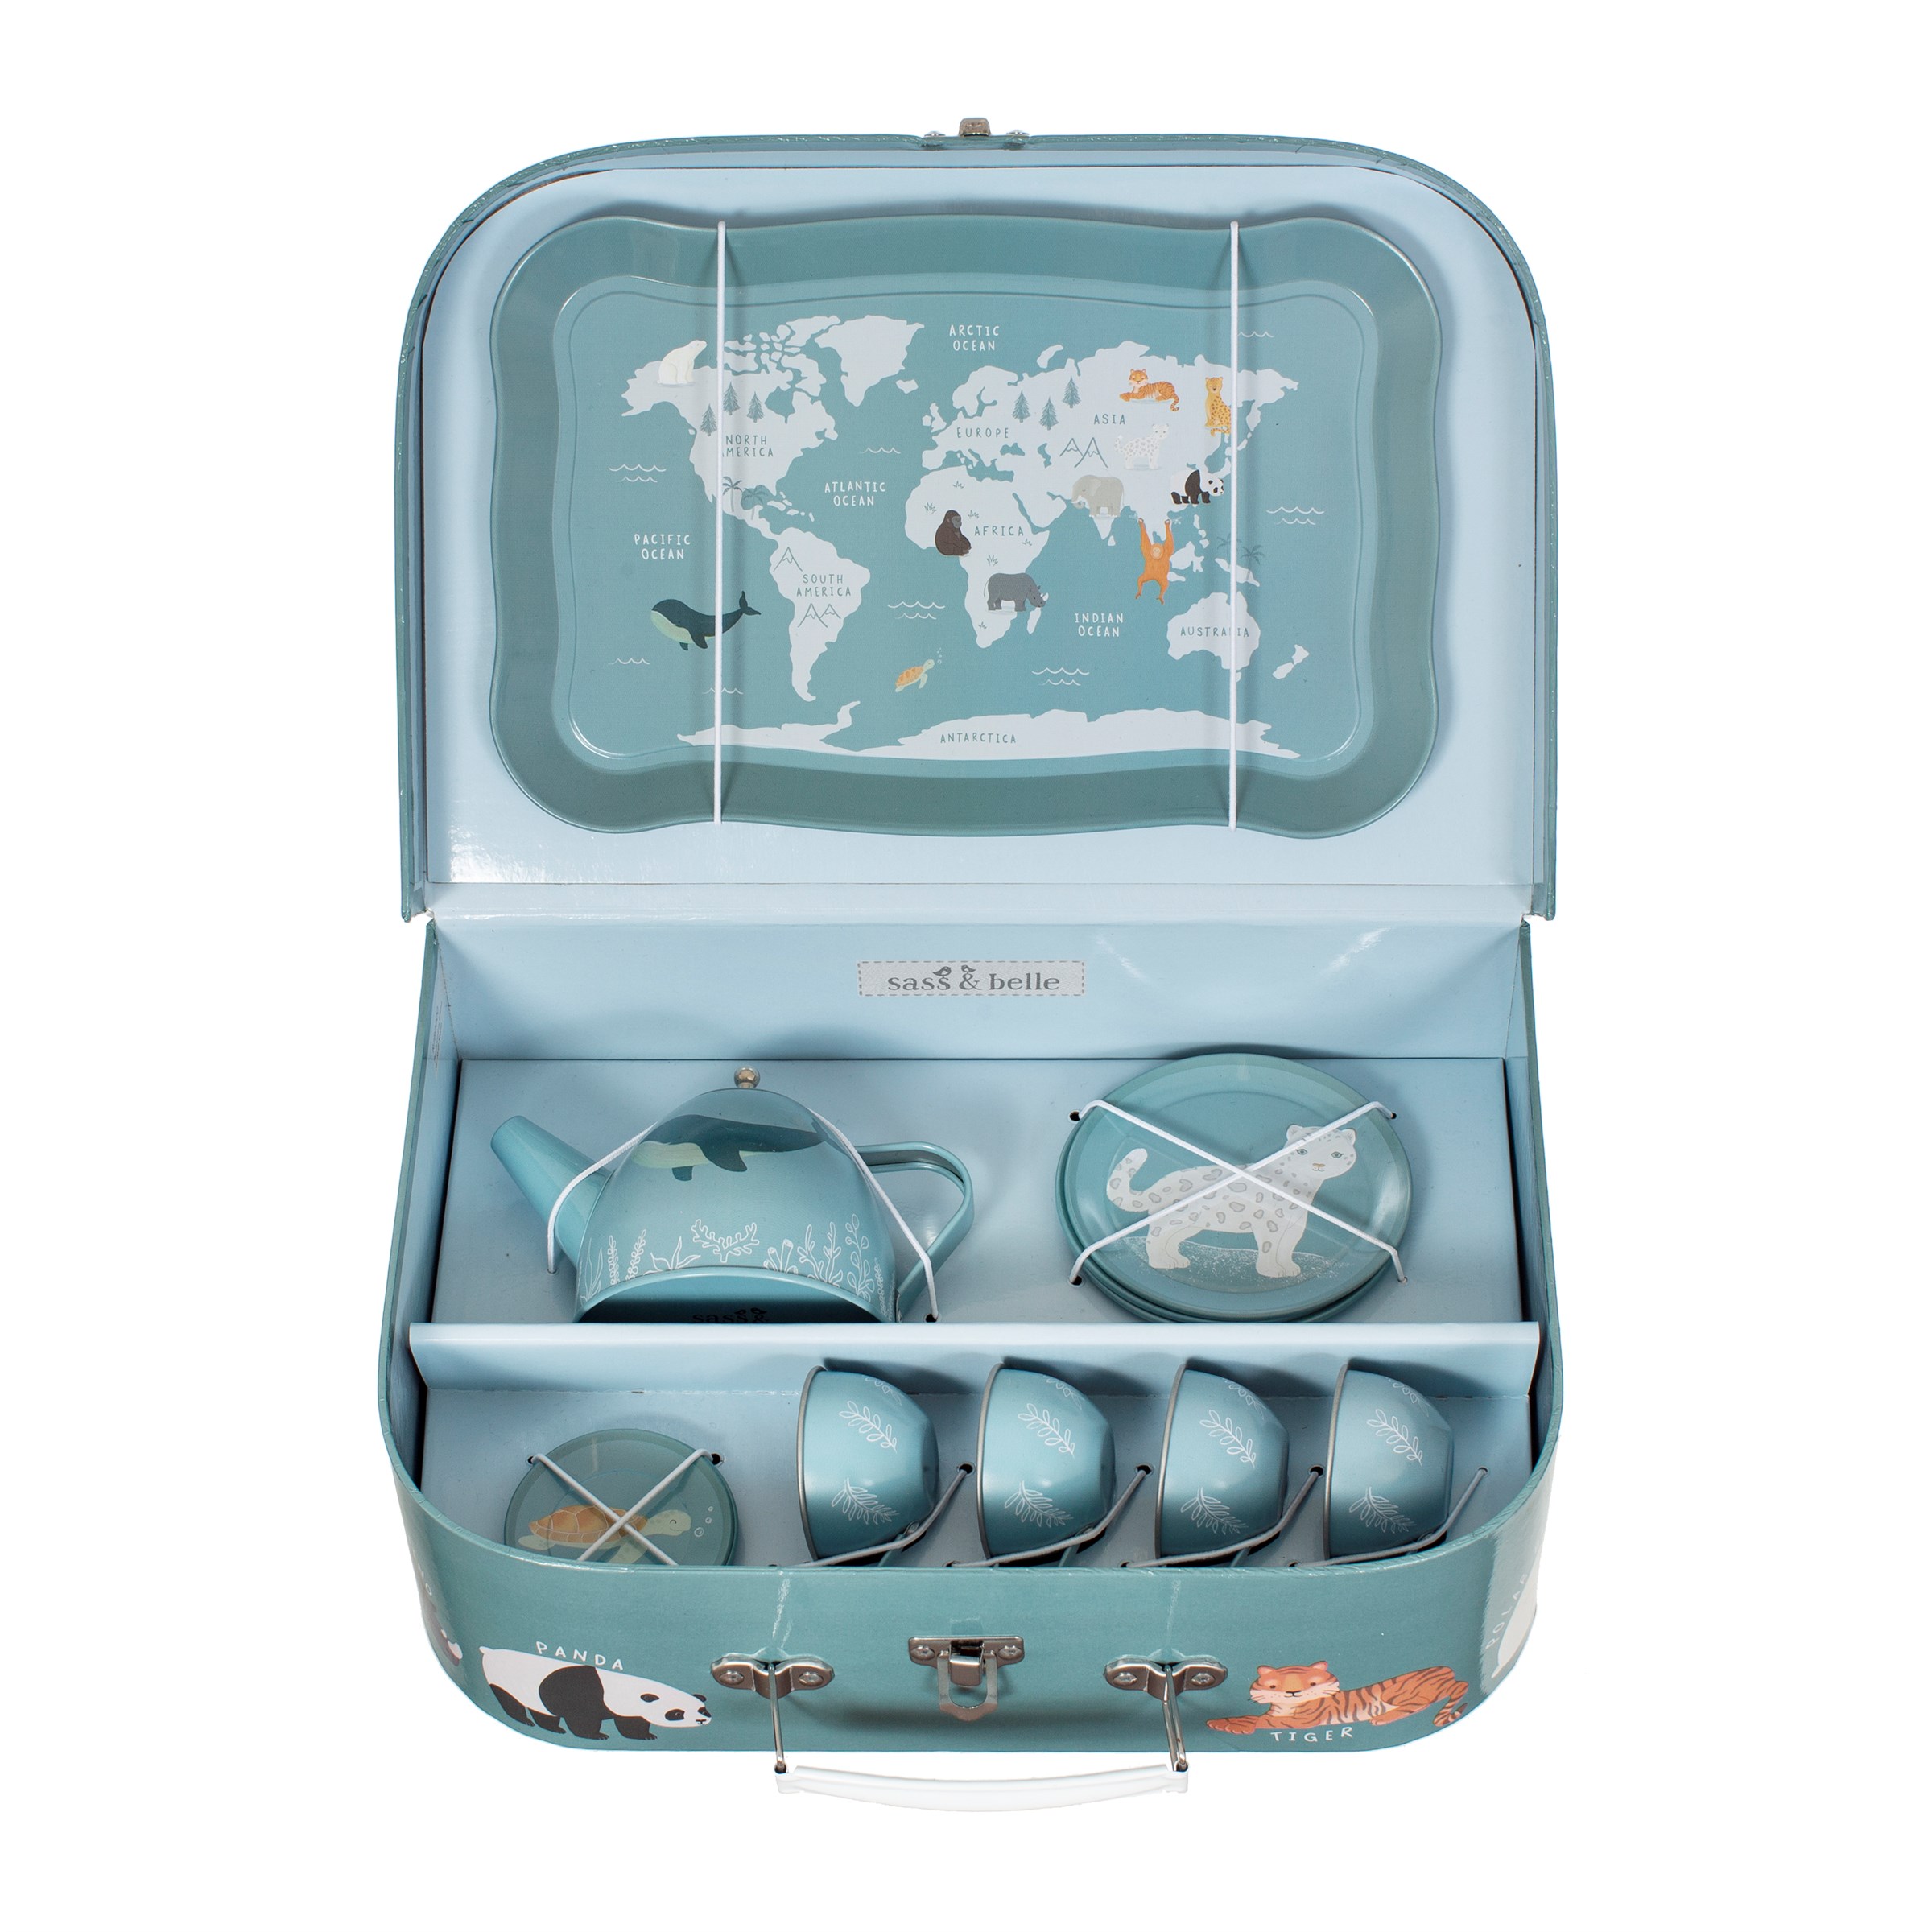 MA VALISE DINETTE A THE ENDANGERED ANIMALS